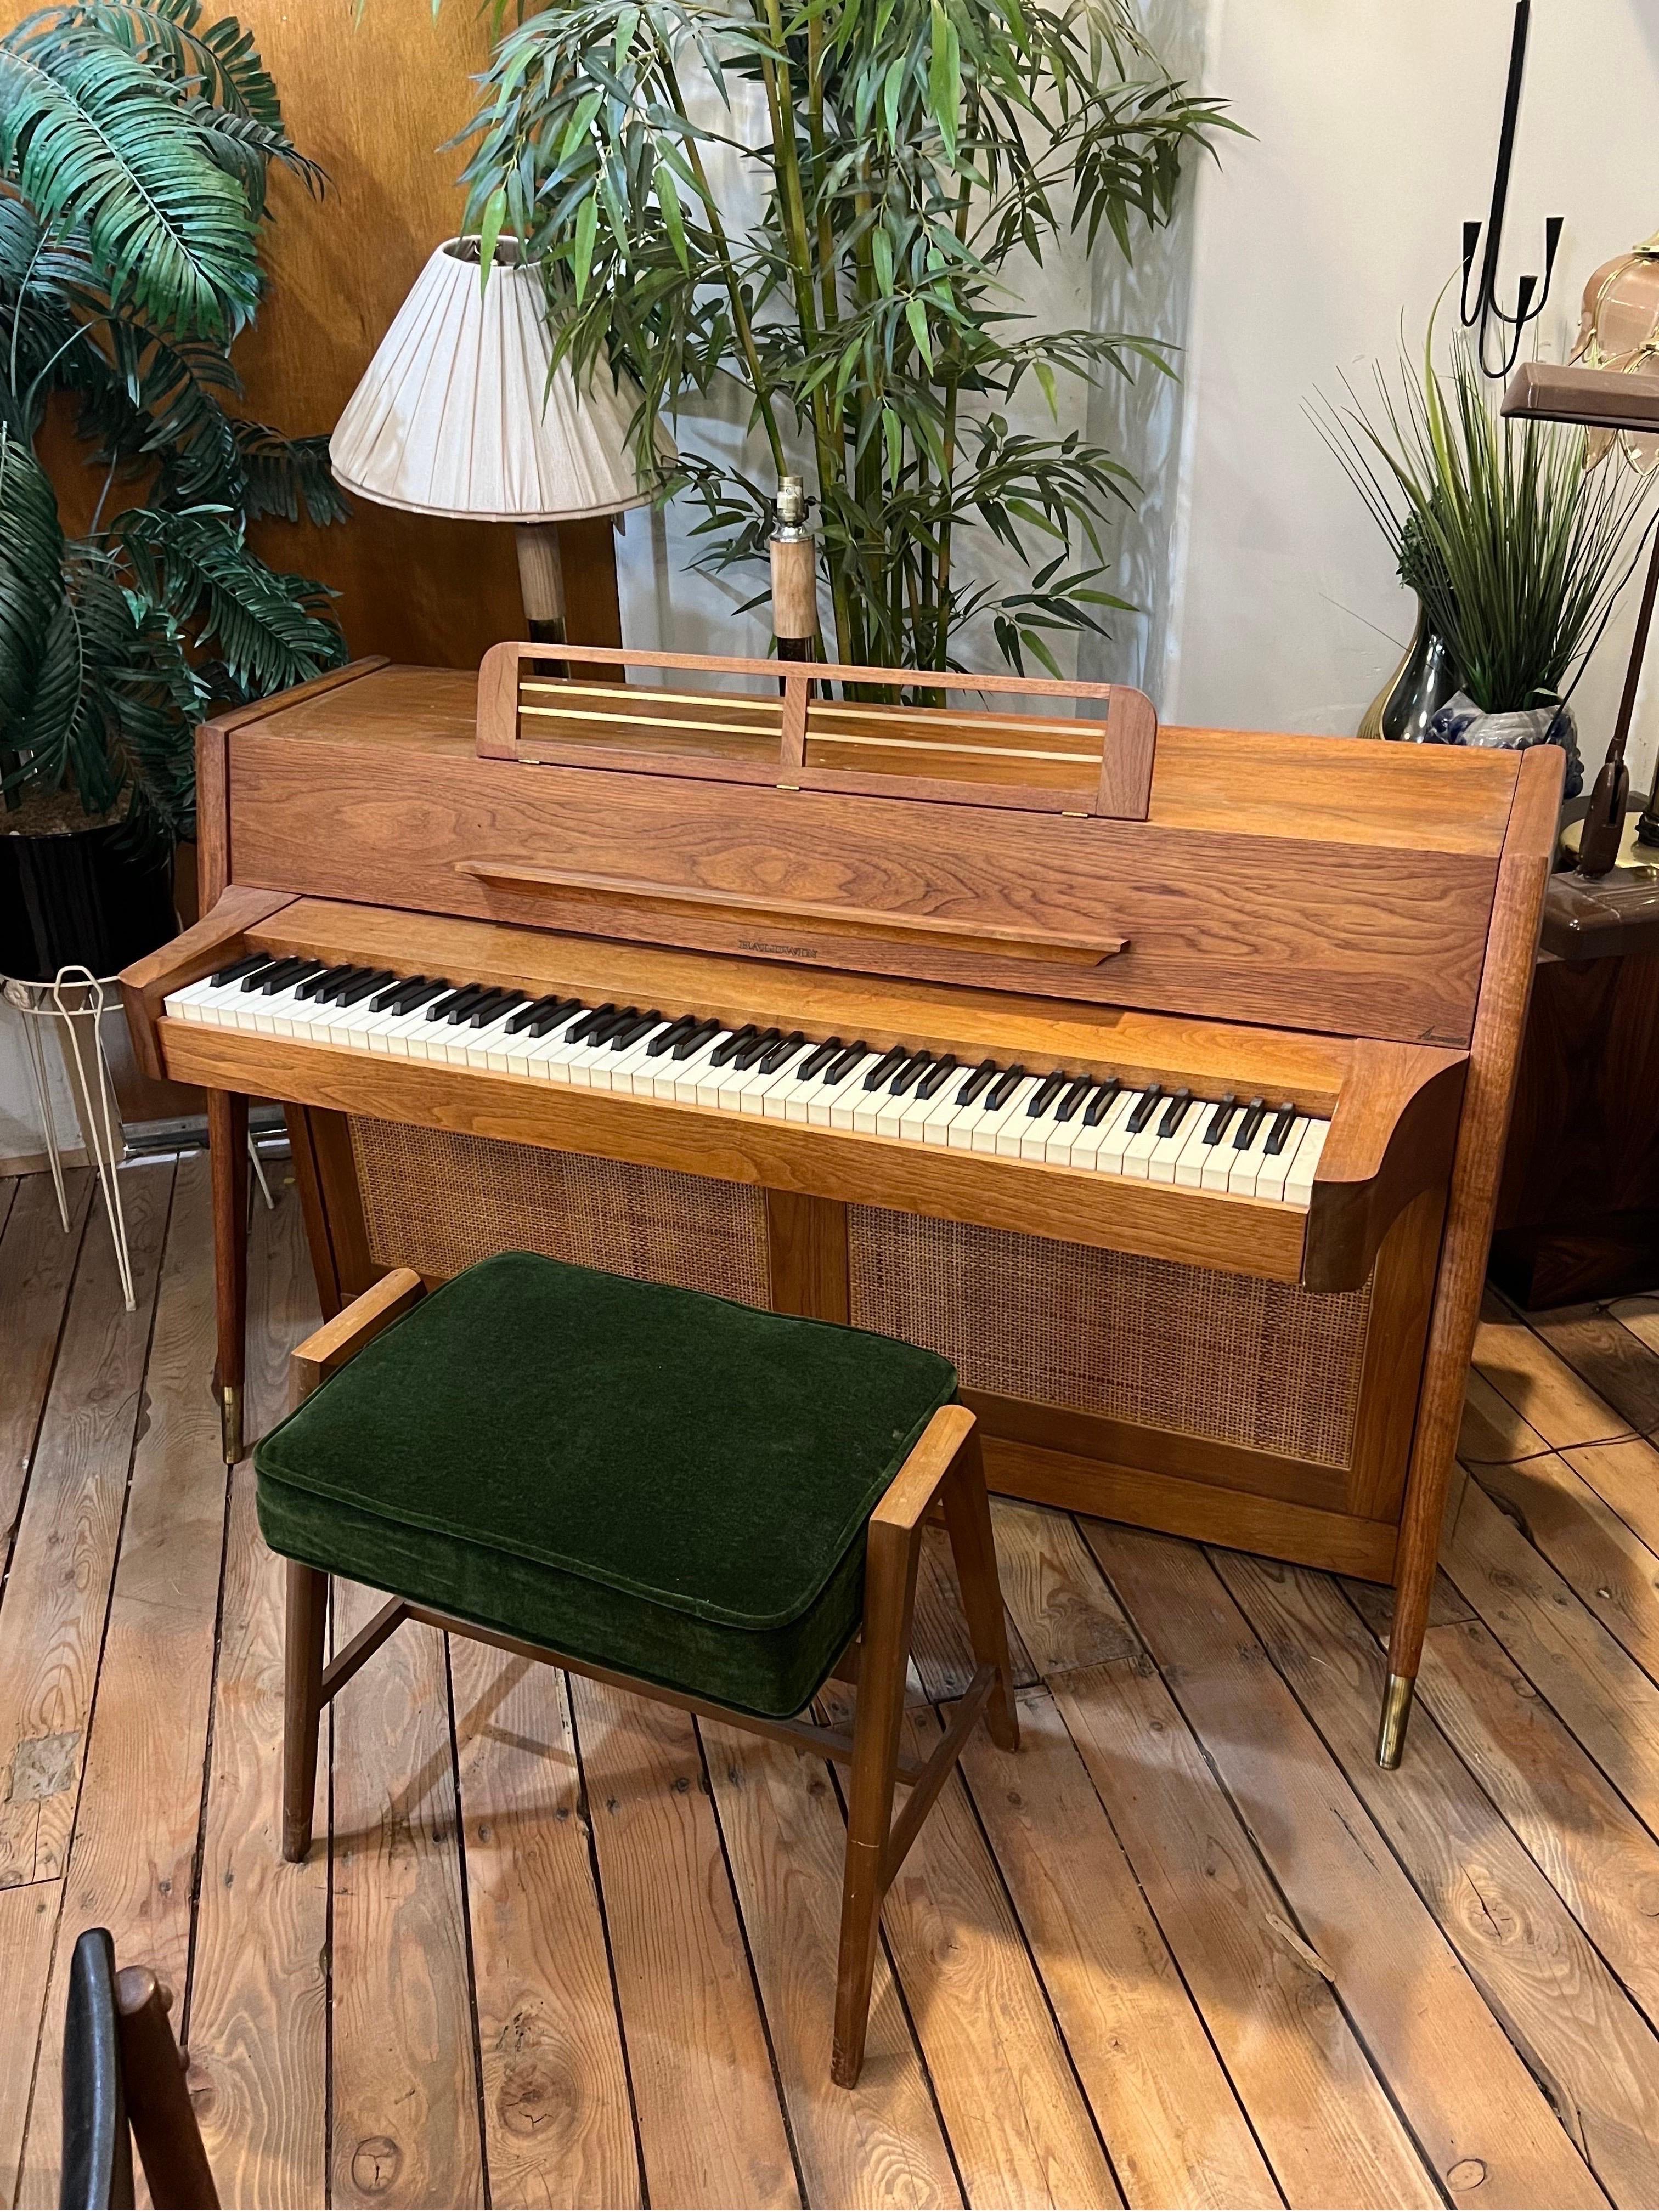 Great vintage condition 
Very minor wear from age and use 
Will need to be tuned but all keys work great 
And it comes with the original matching bench 

Has good sound and looks amazing 
These are hard to find especially in this good of condition